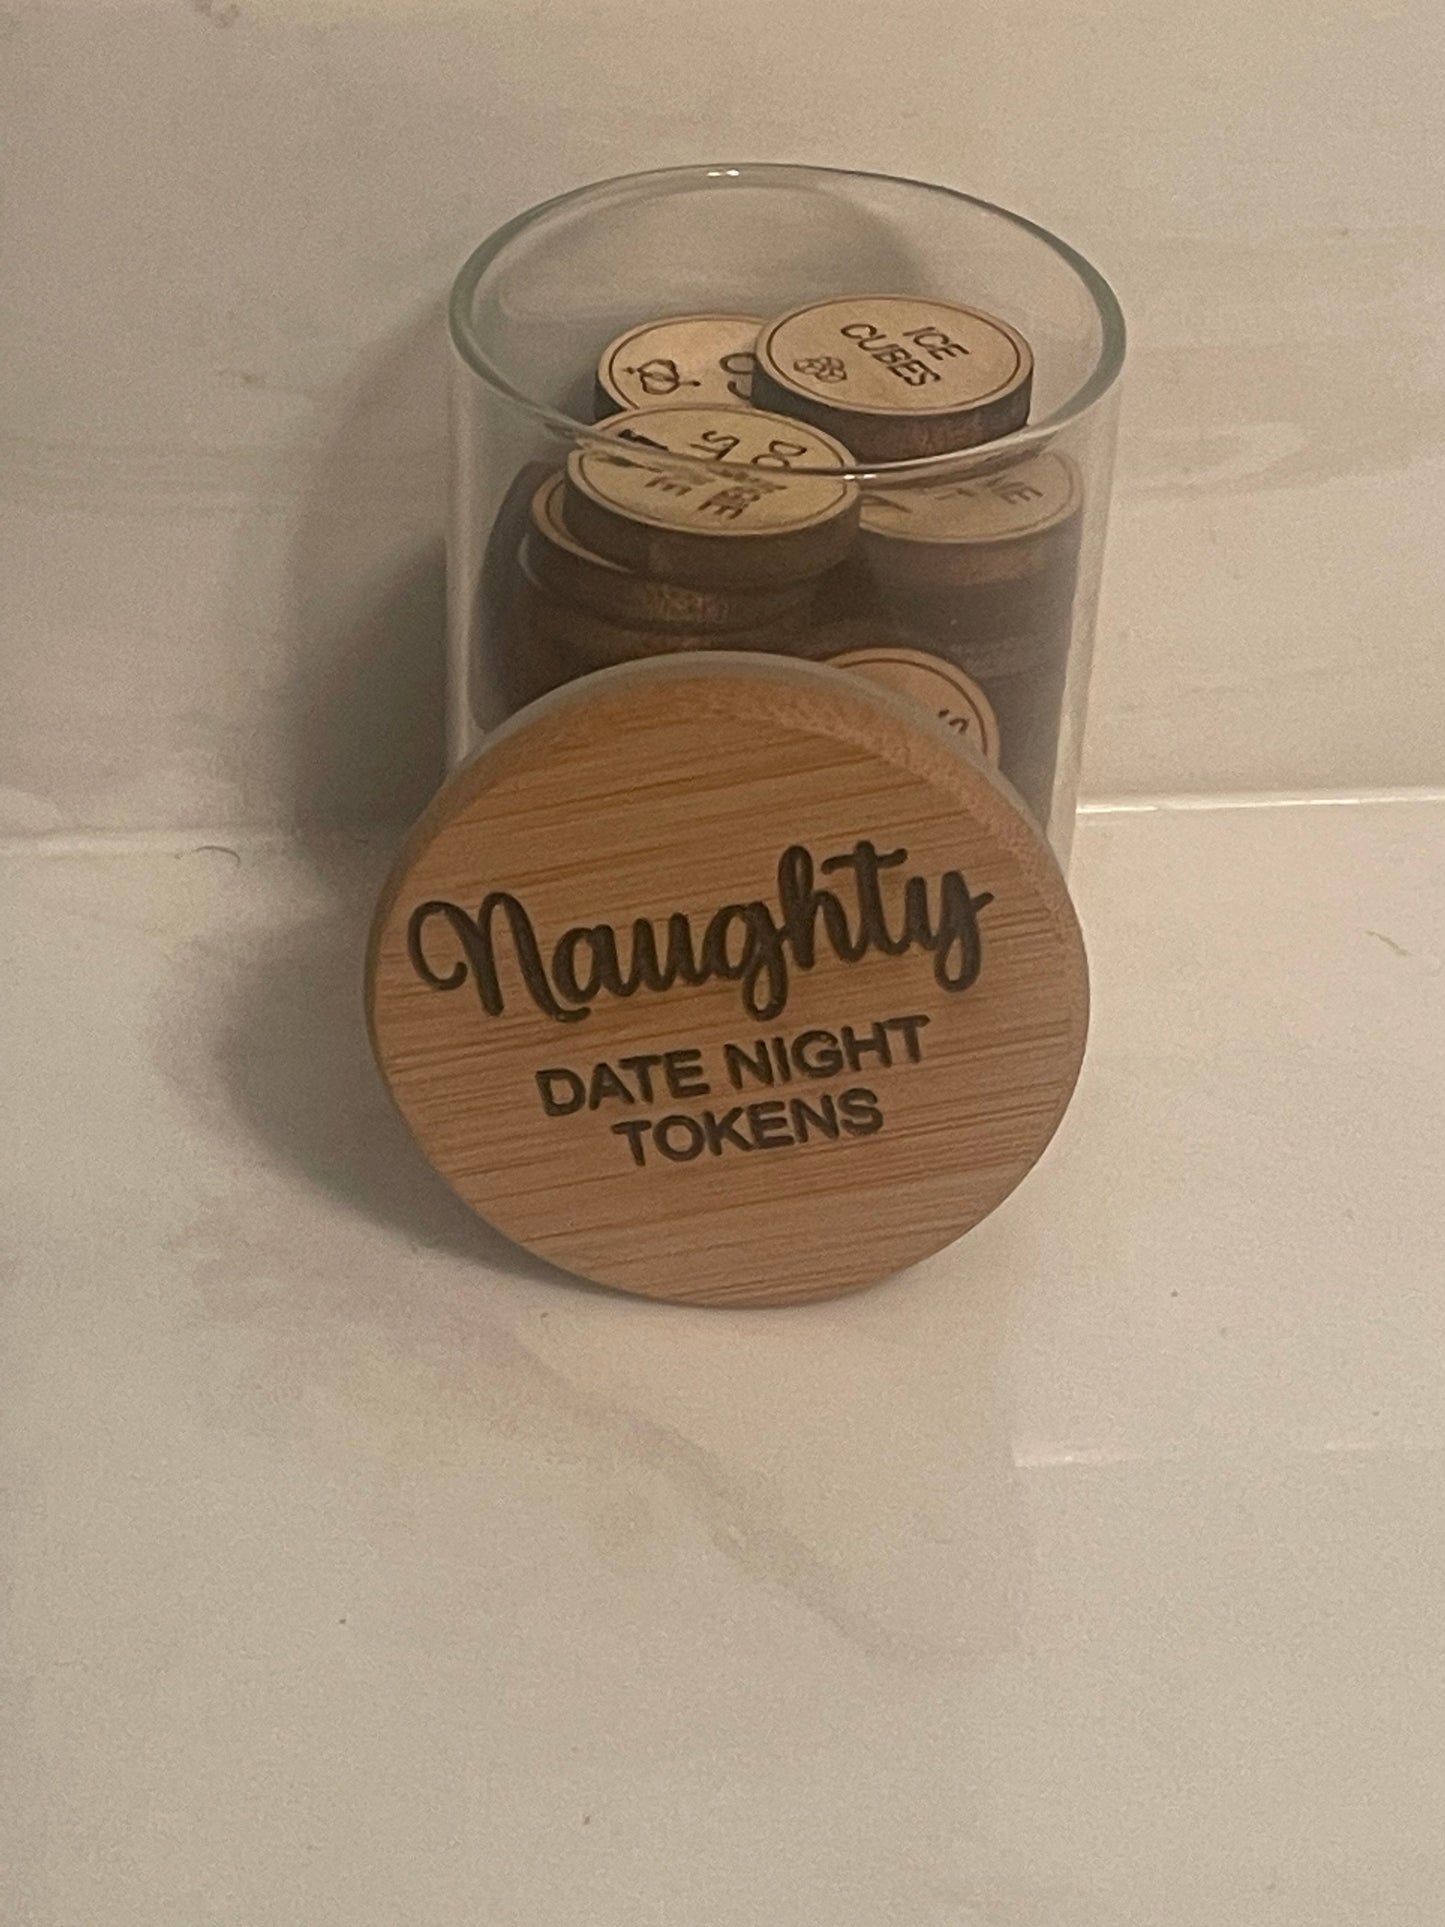 Naughty Date Night Tokens (44 count)